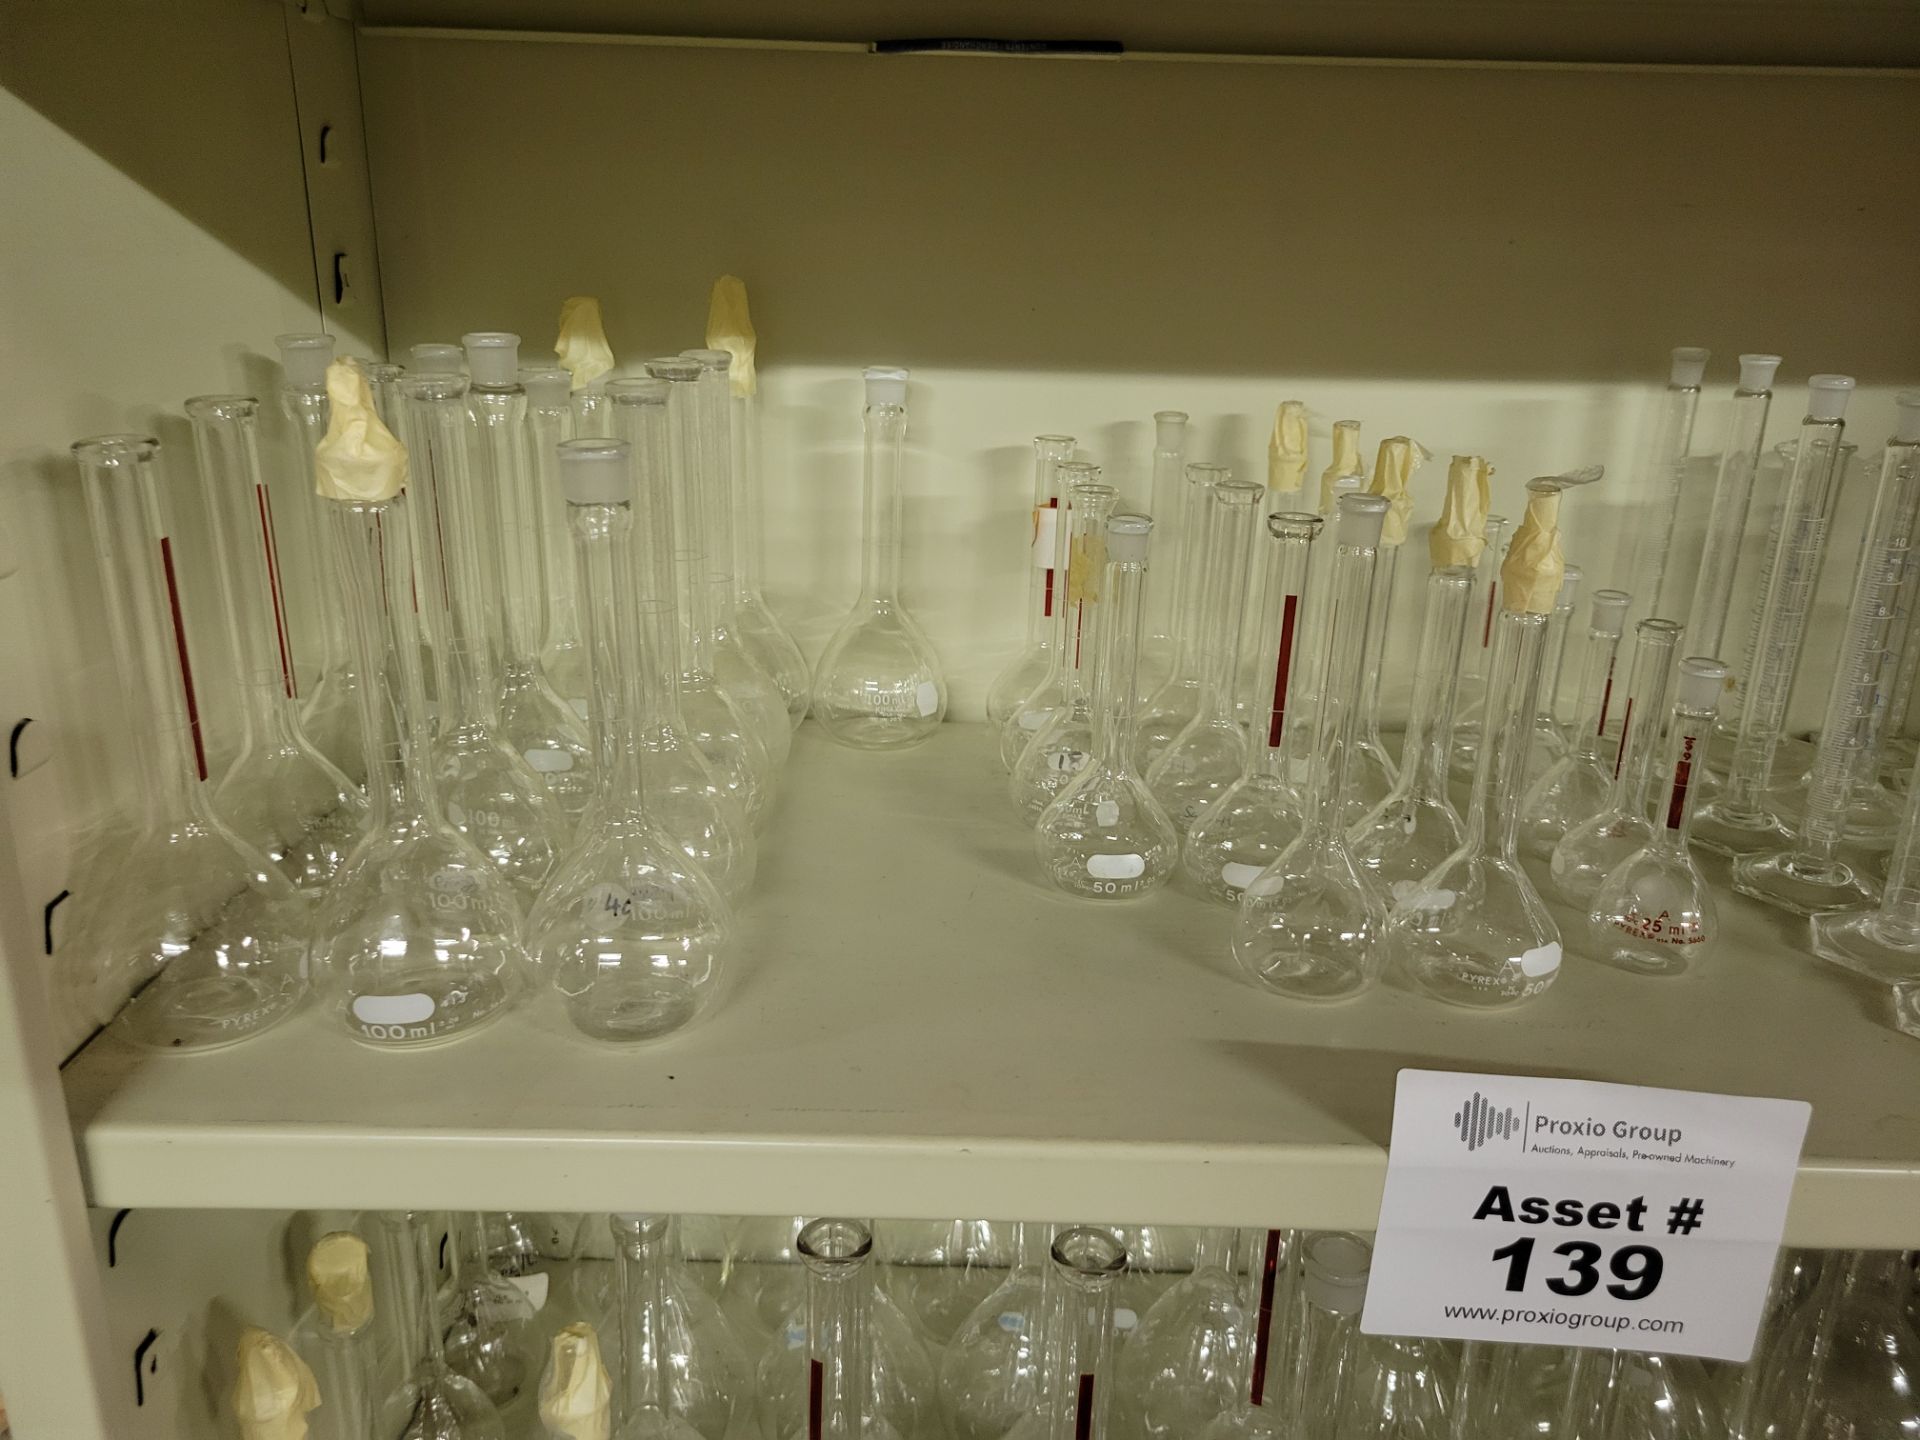 (2) Shelves of Various Sized and Manufacturer Glass Erlenmeyer Flasks Sizes Range From 25 to500mL - Image 3 of 5